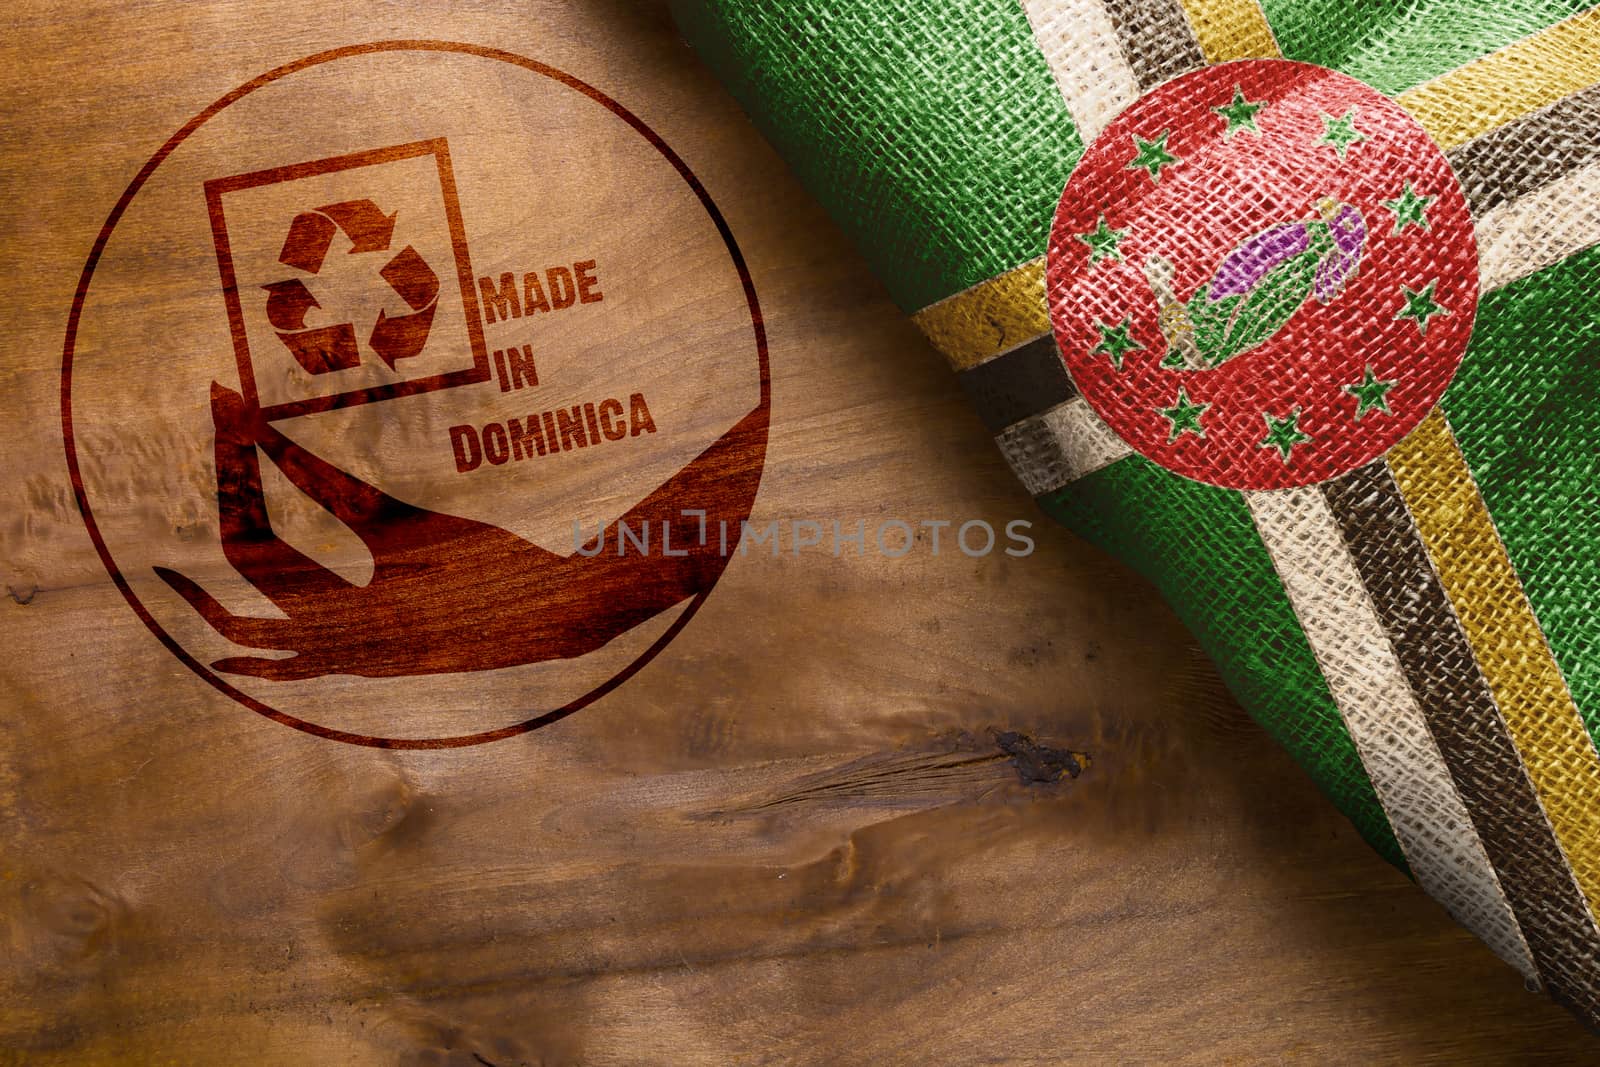 Stamp print on industrial processing in Dominica